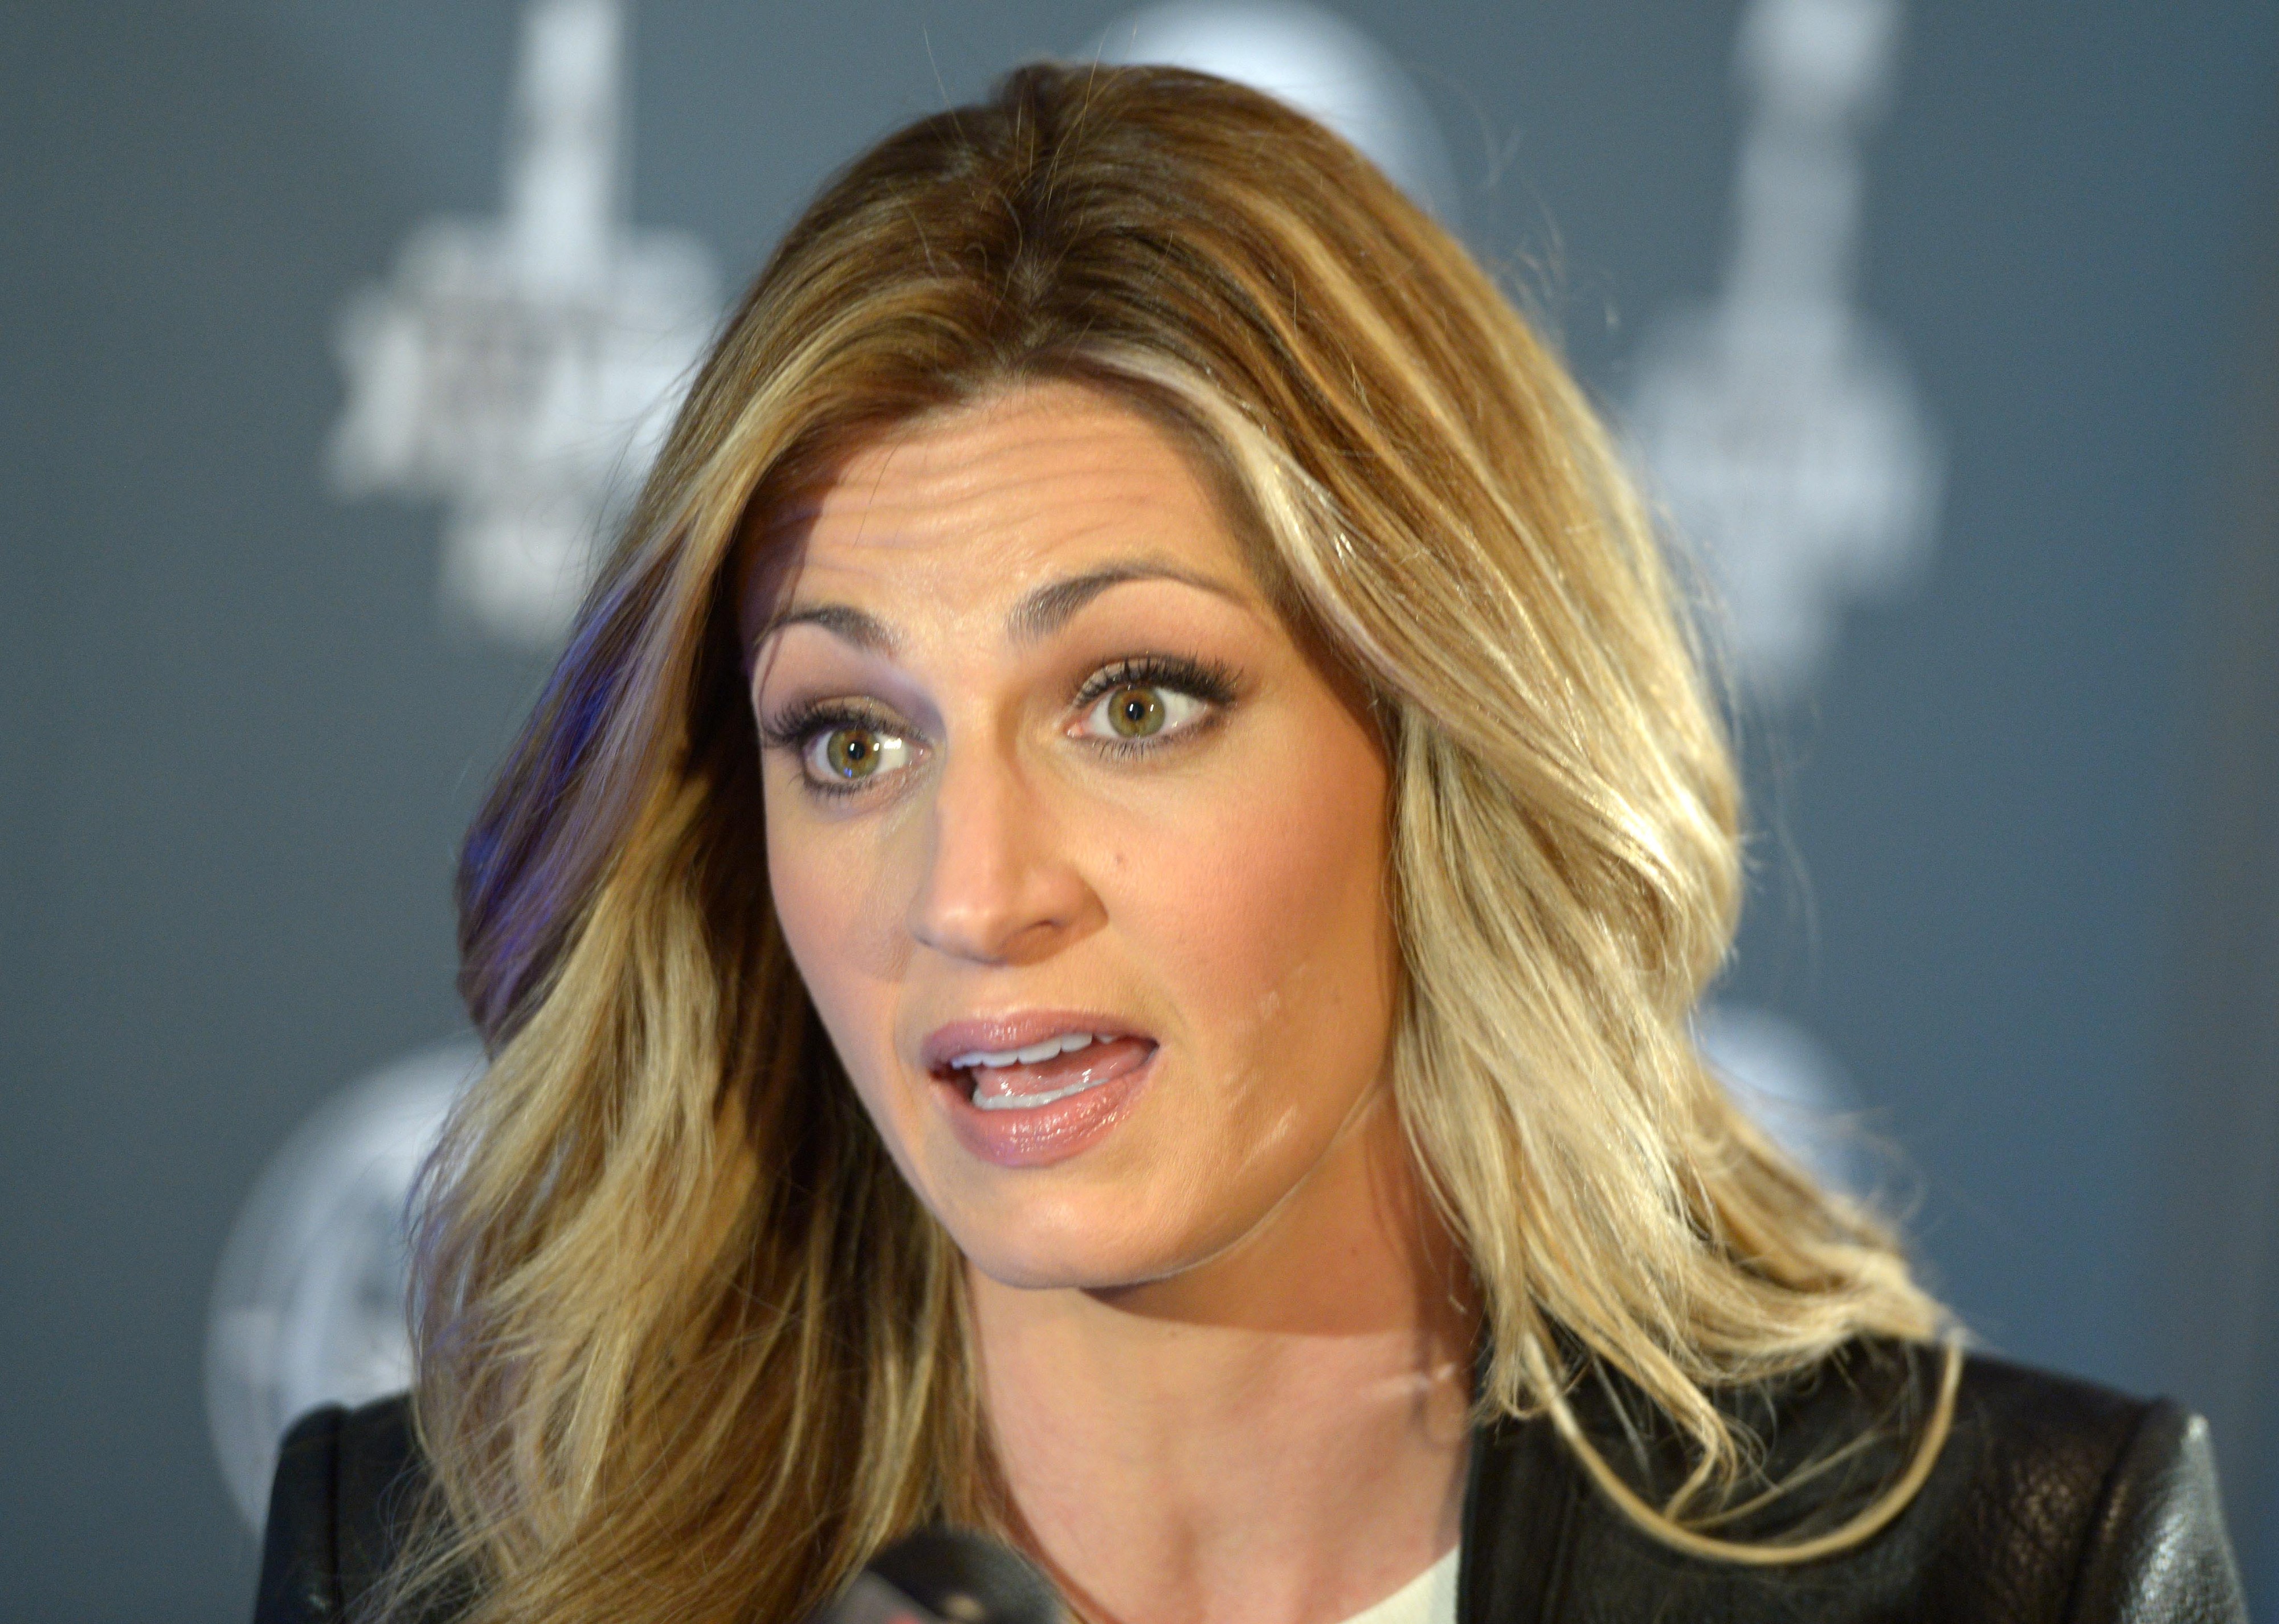 Yes, you can bet on whether Erin Andrews (above) or Pam Oliver will be the first sideline reporter shown after kickoff on Sunday